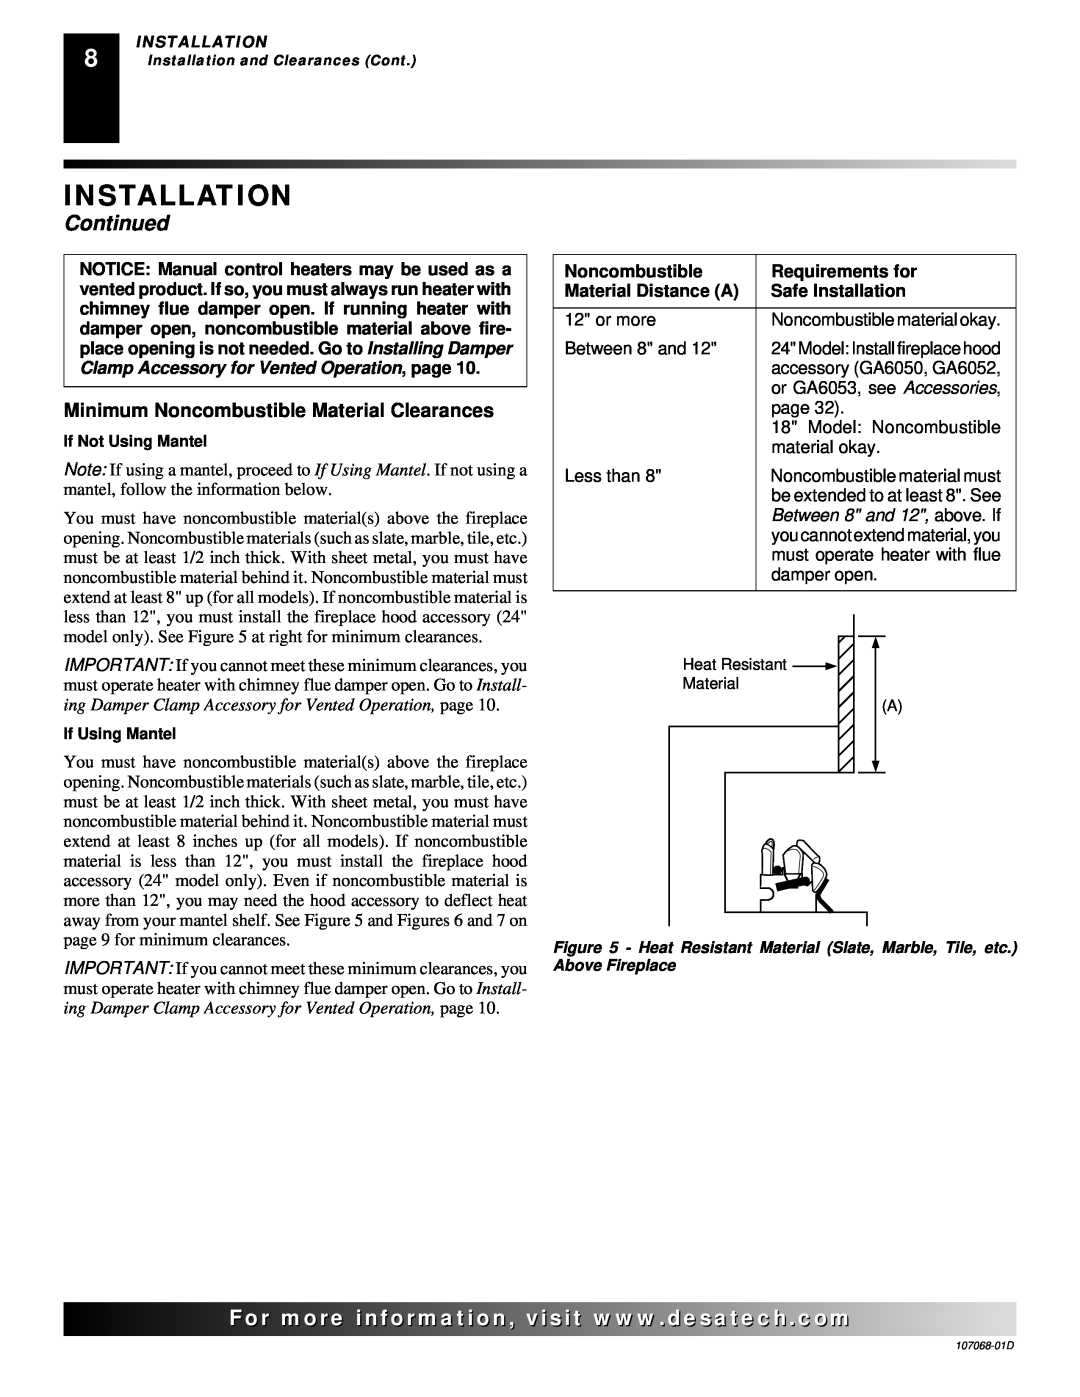 Desa CGS3124P Installation, Continued, Minimum Noncombustible Material Clearances, Requirements for, Material Distance A 